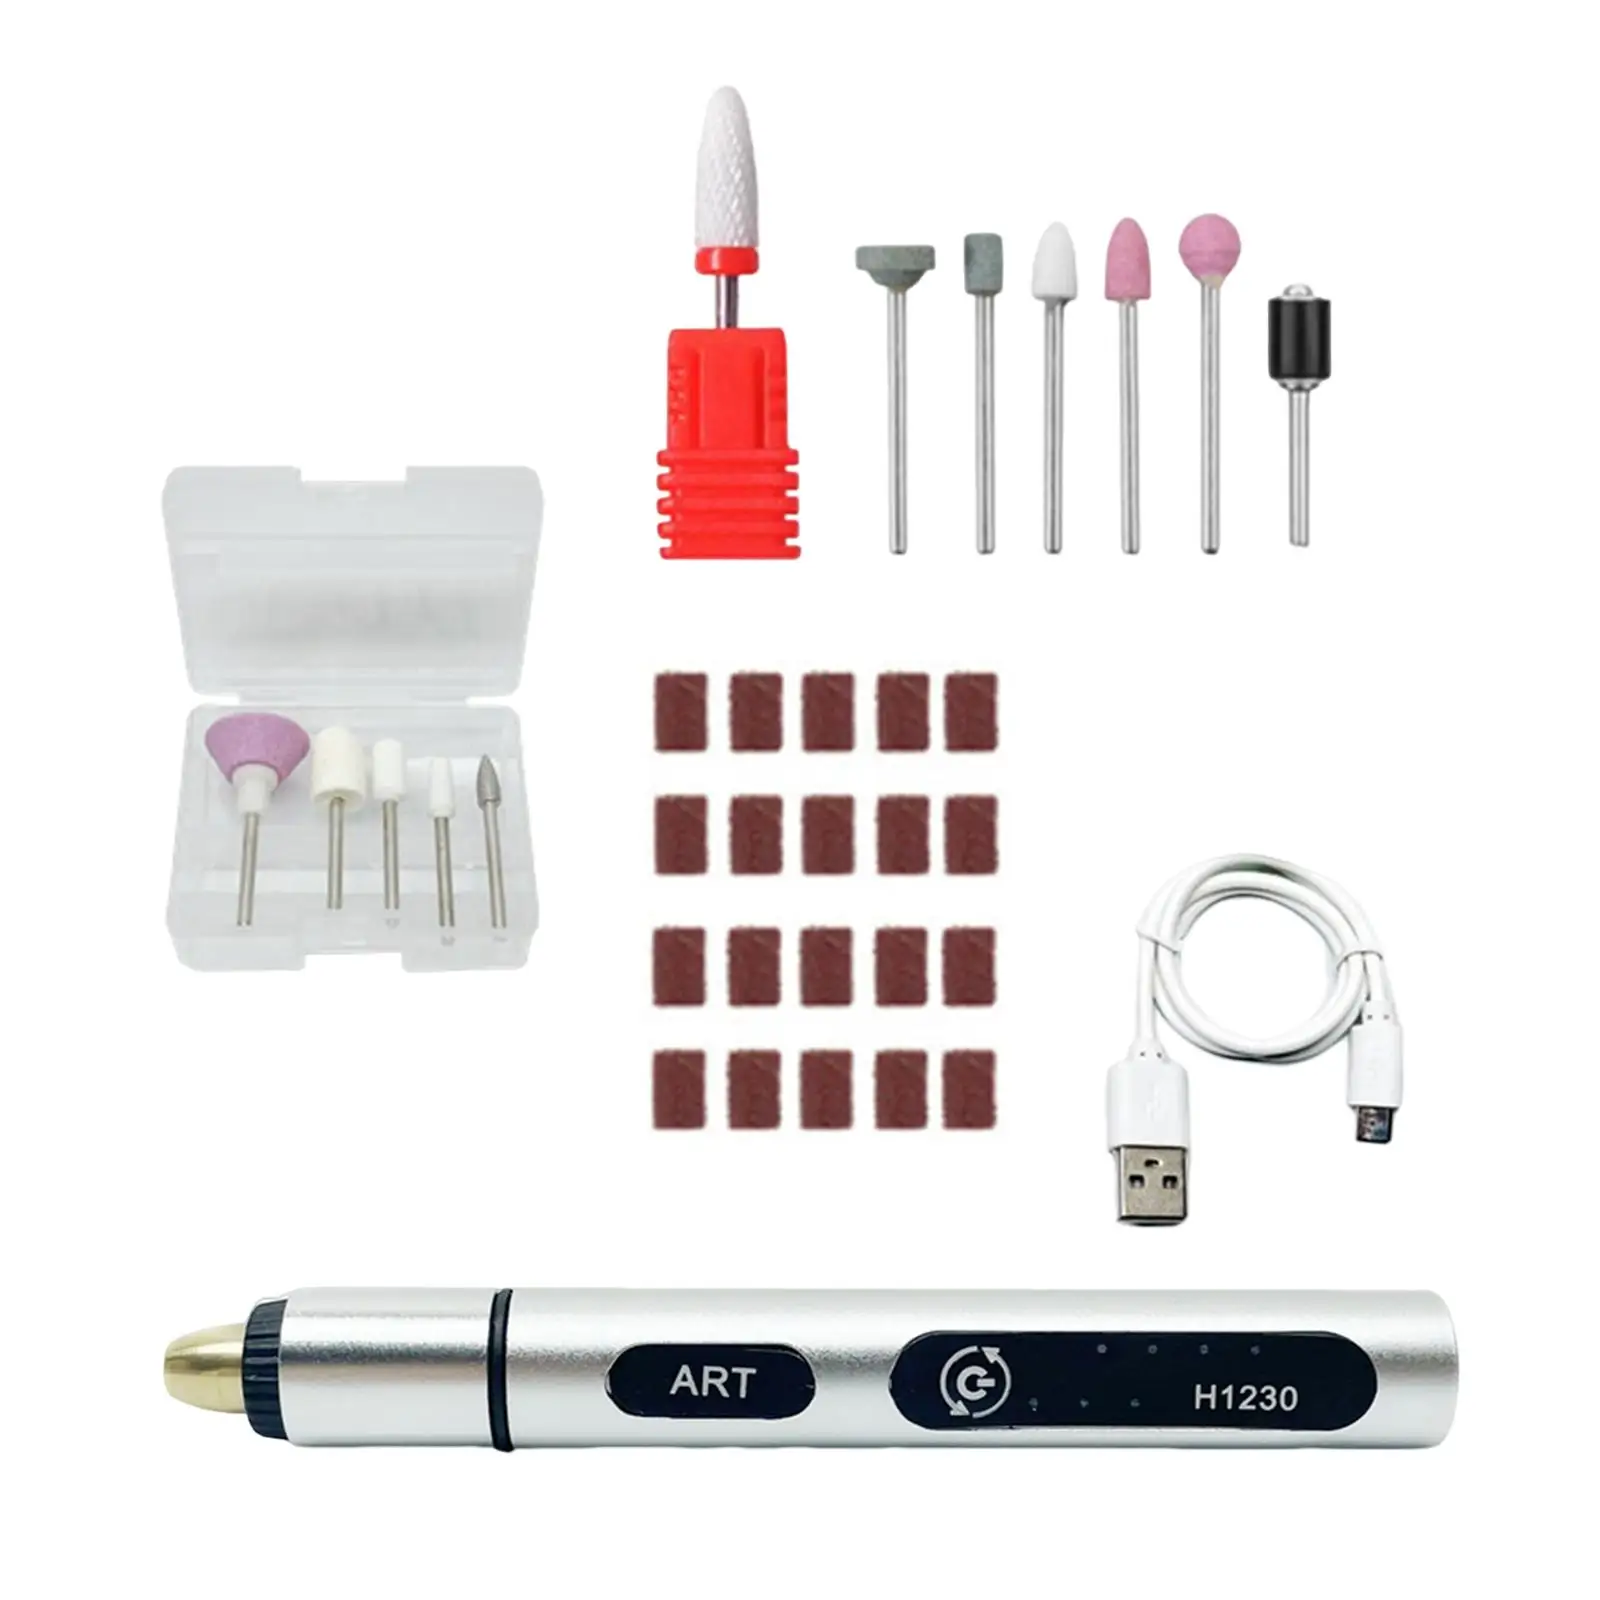 Handheld Electric Nail Drills Kit Rechargeable Micro Engraver Pen for Wood